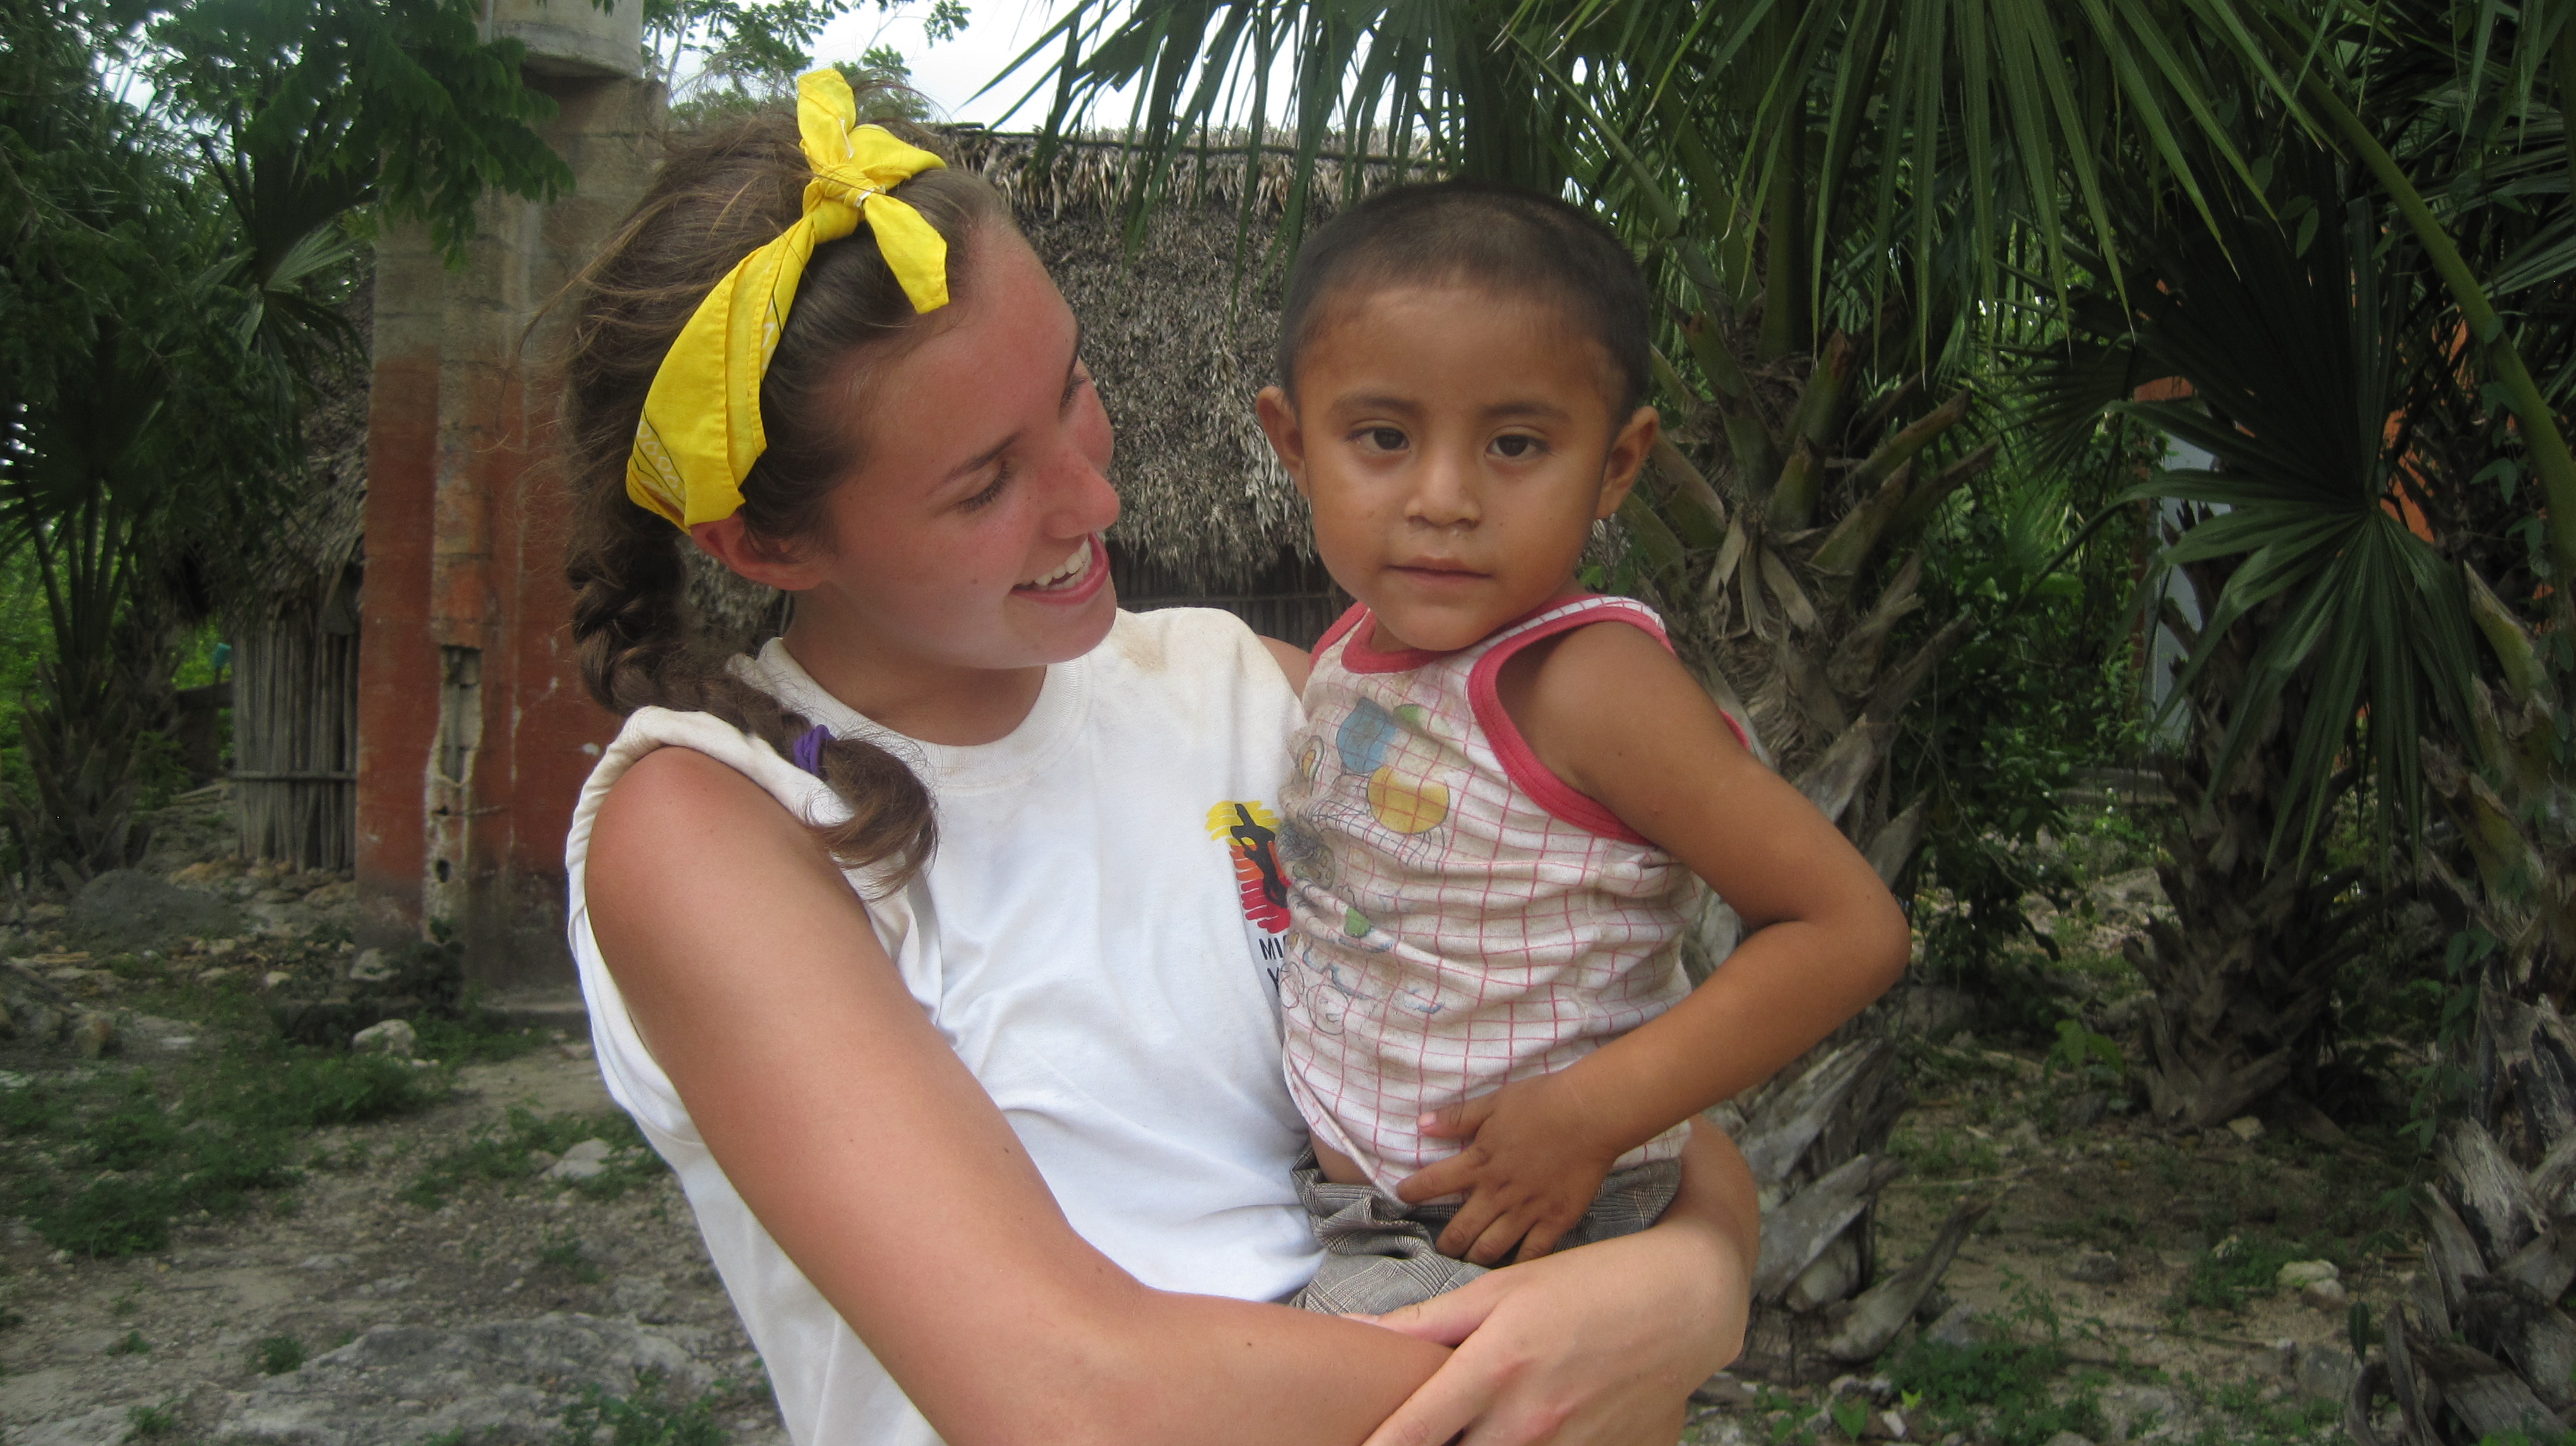 Gabby Diamond, a graduate of Everest Academy, holds a young child from Nuevo Druango